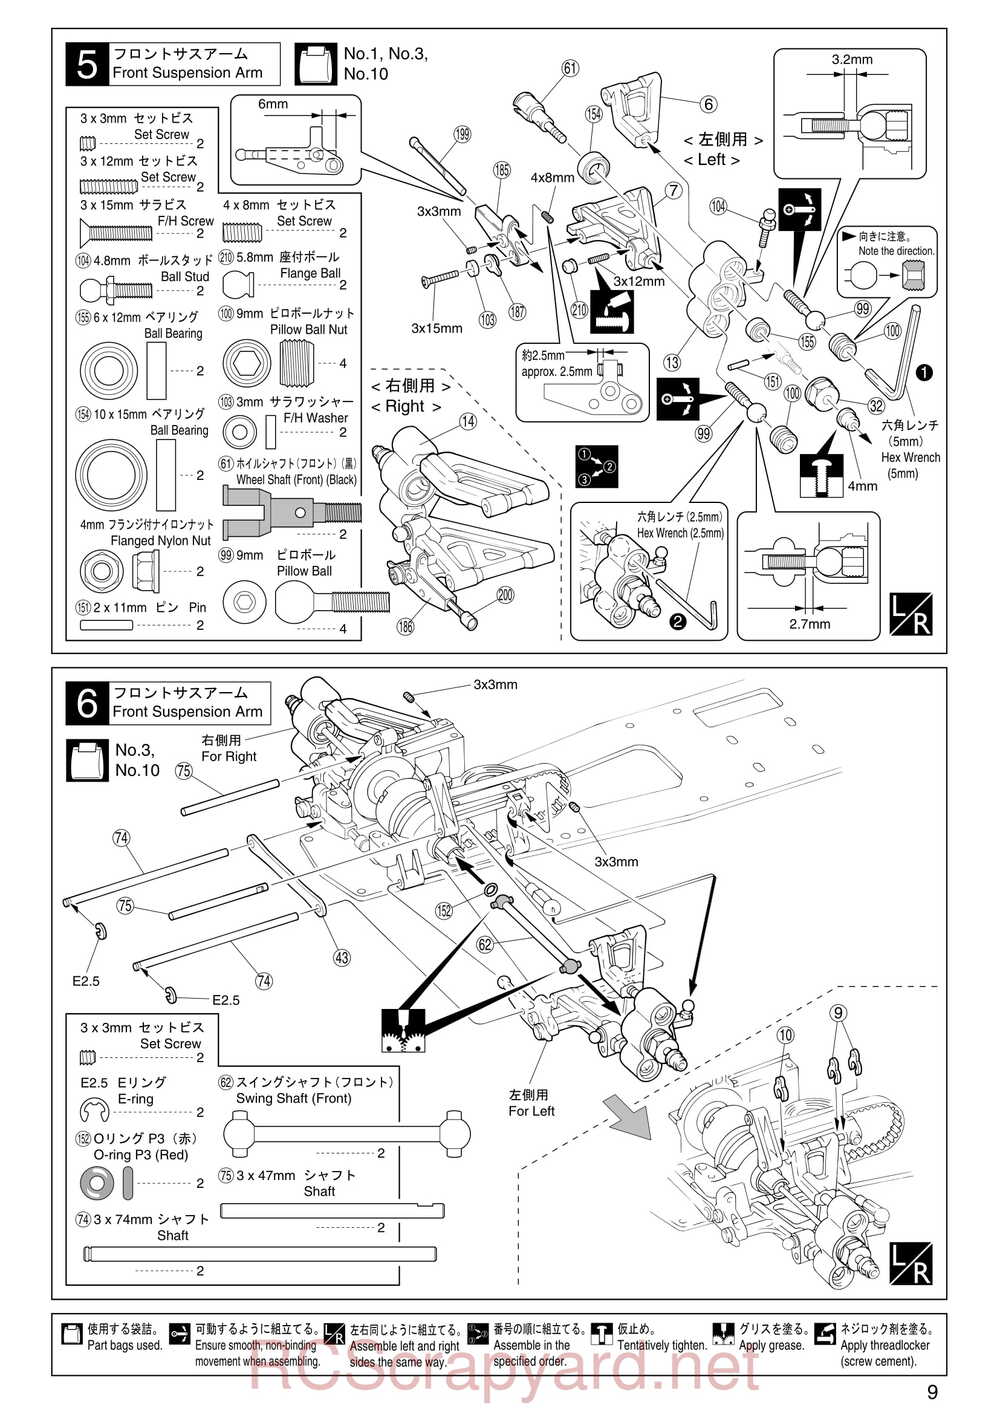 Kyosho - 31102 - V-One RR - Manual - Page 09